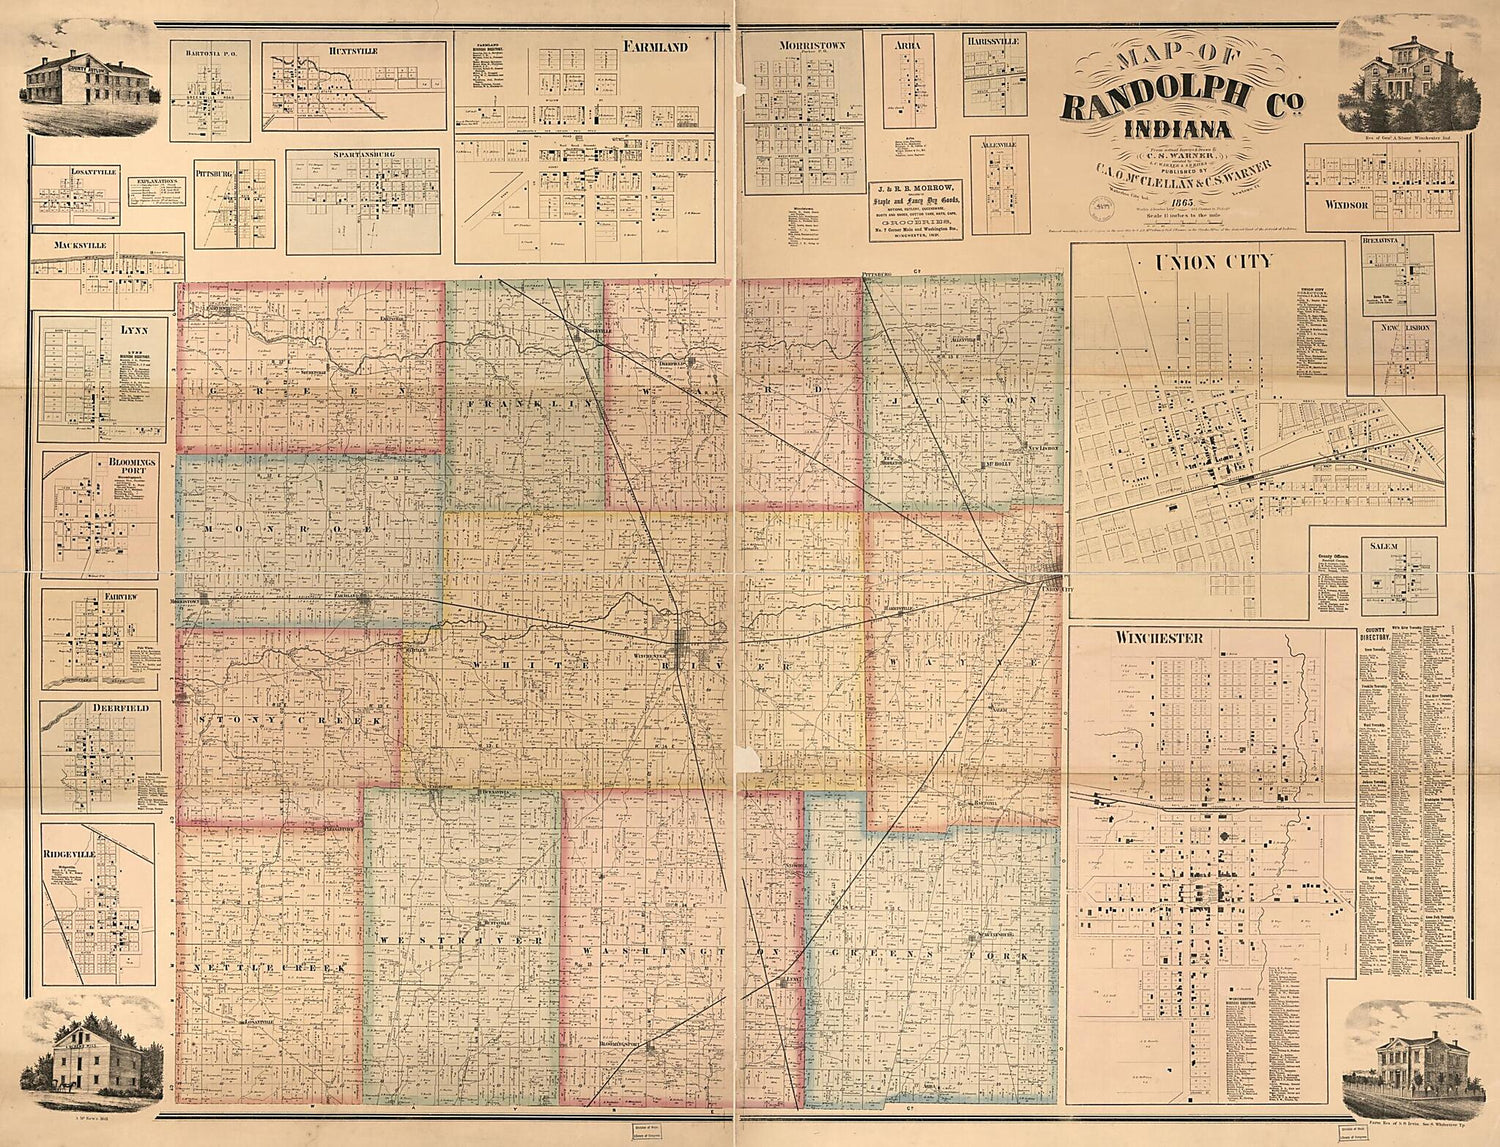 This old map of Map of Randolph County, Indiana (Map of Randolph County, Indiana) from 1865 was created by C. A. O. McClellan, C. S. Warner, L.C. Warner in 1865